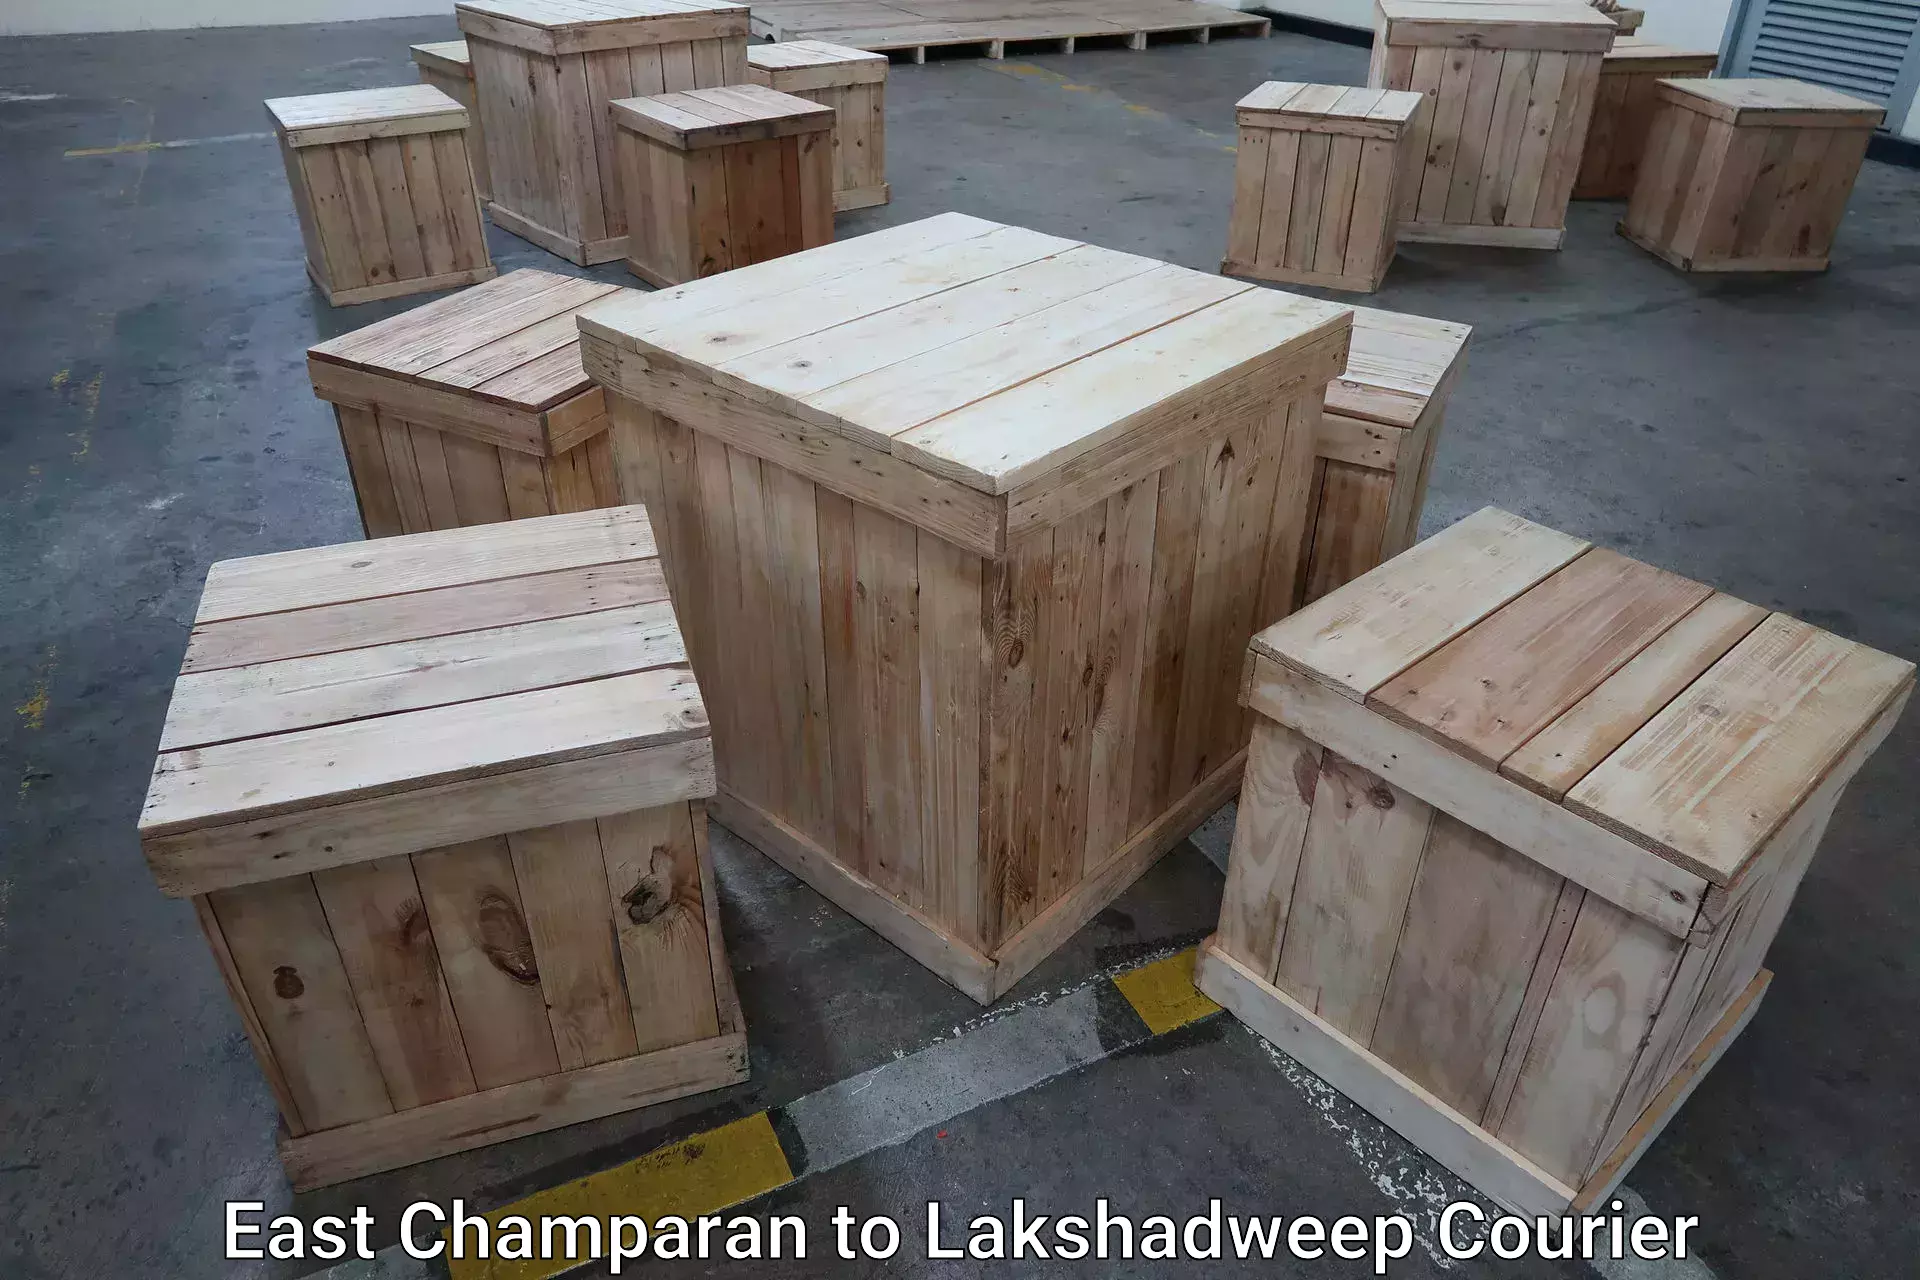 Luggage shipping service East Champaran to Lakshadweep